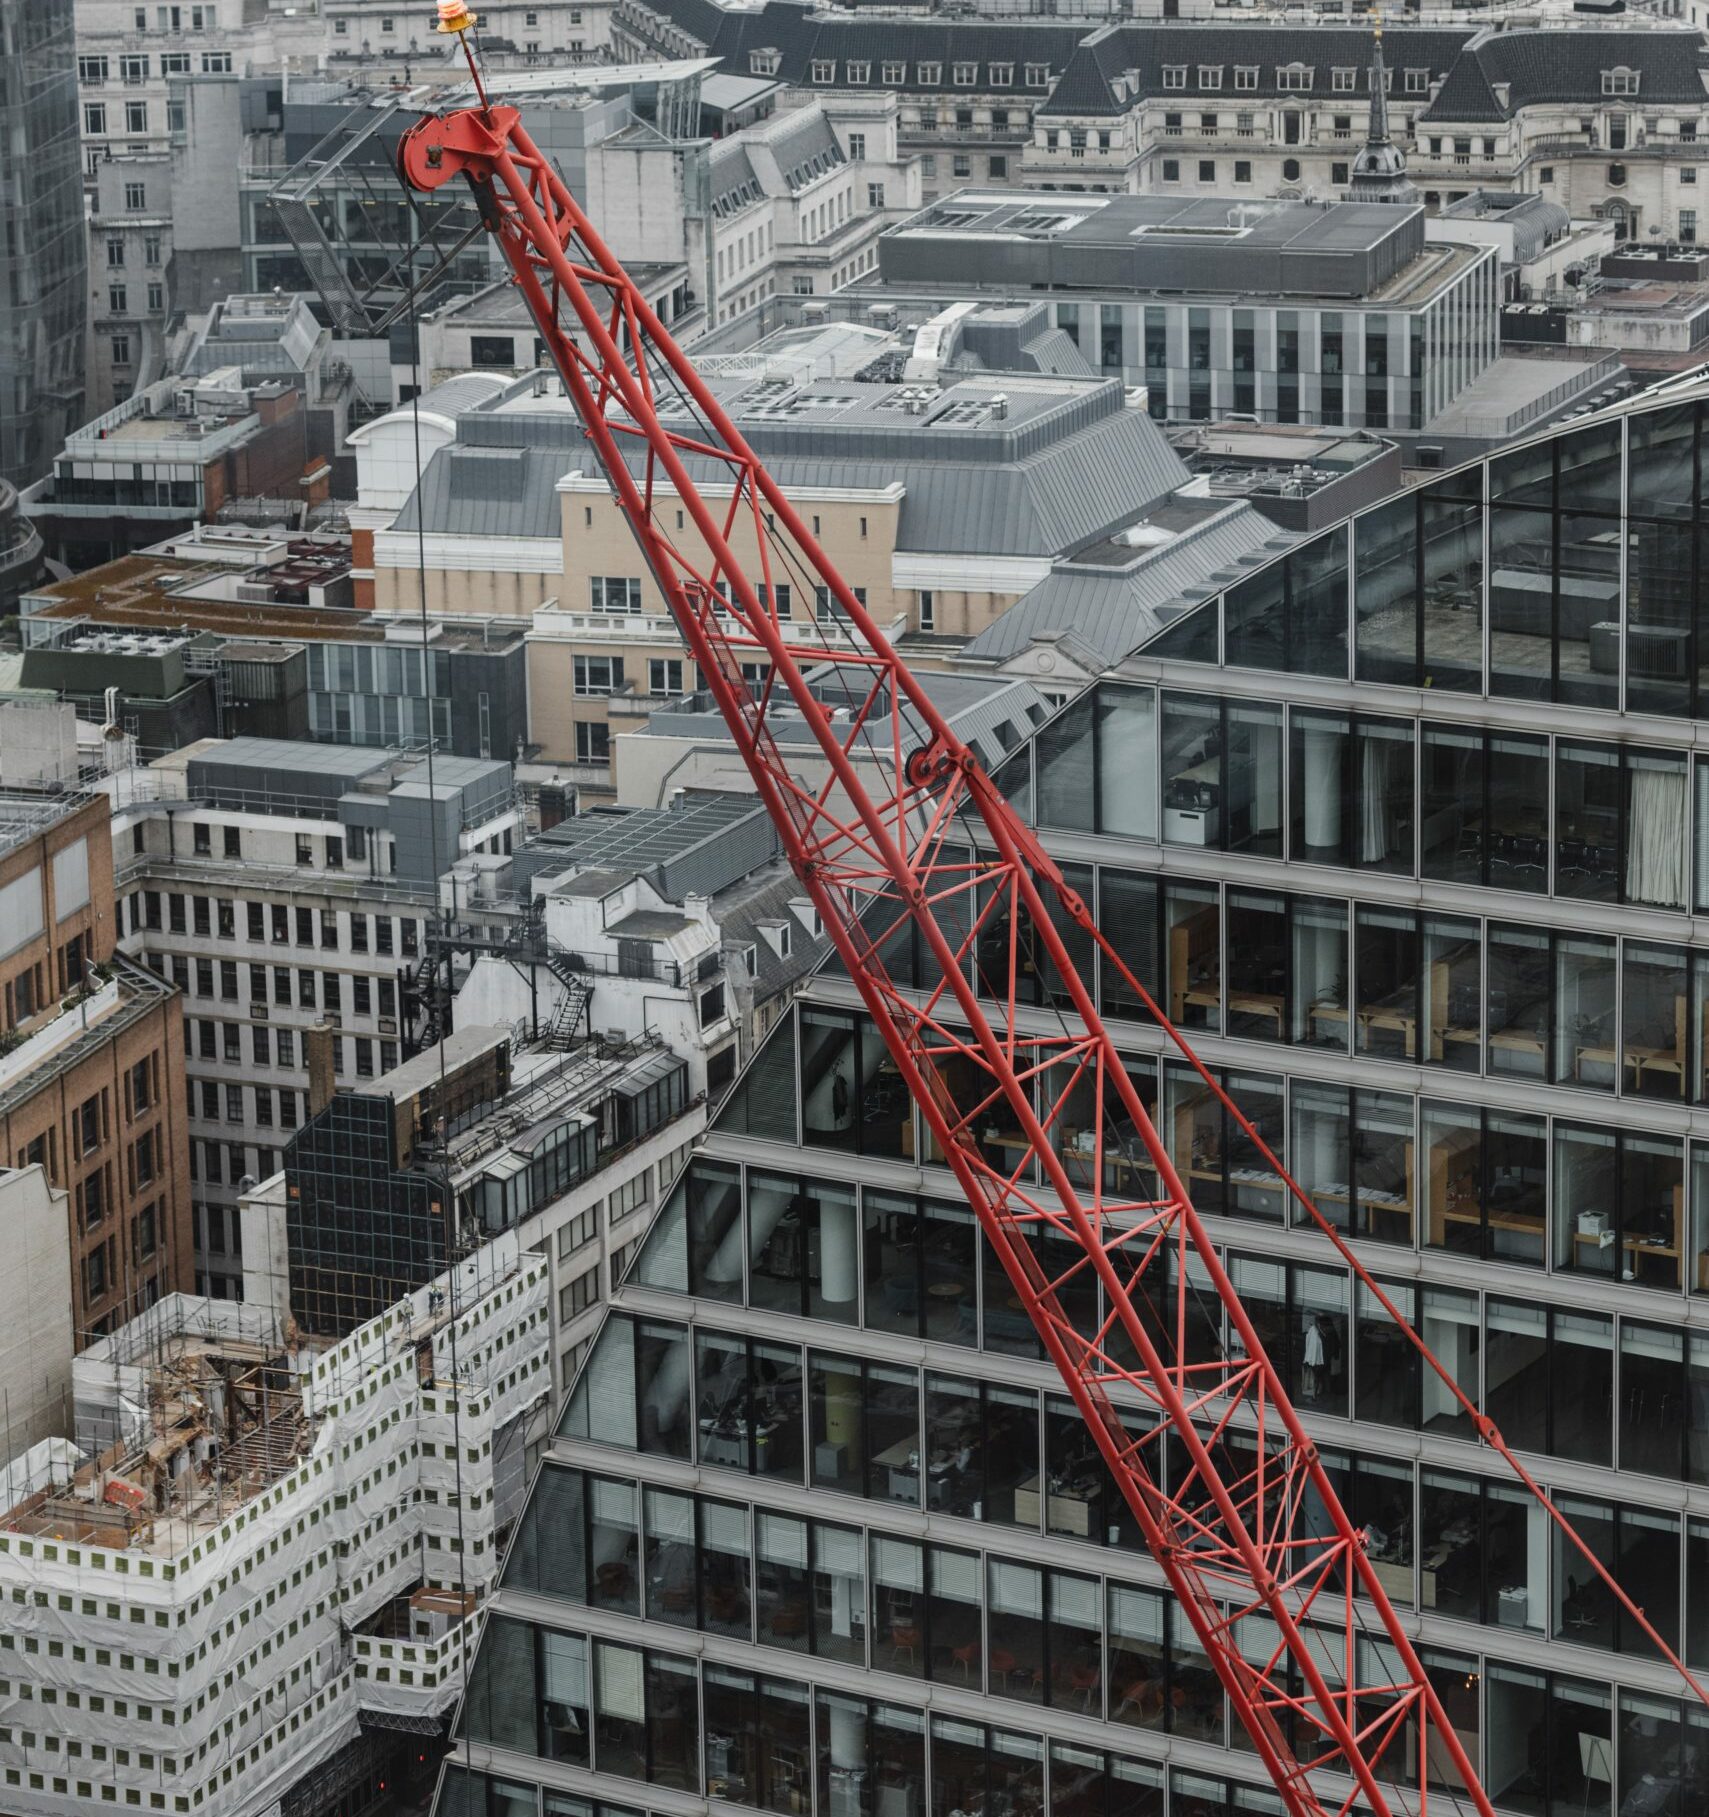 An image of a red crane in a construction site in the UK with buildings in the background